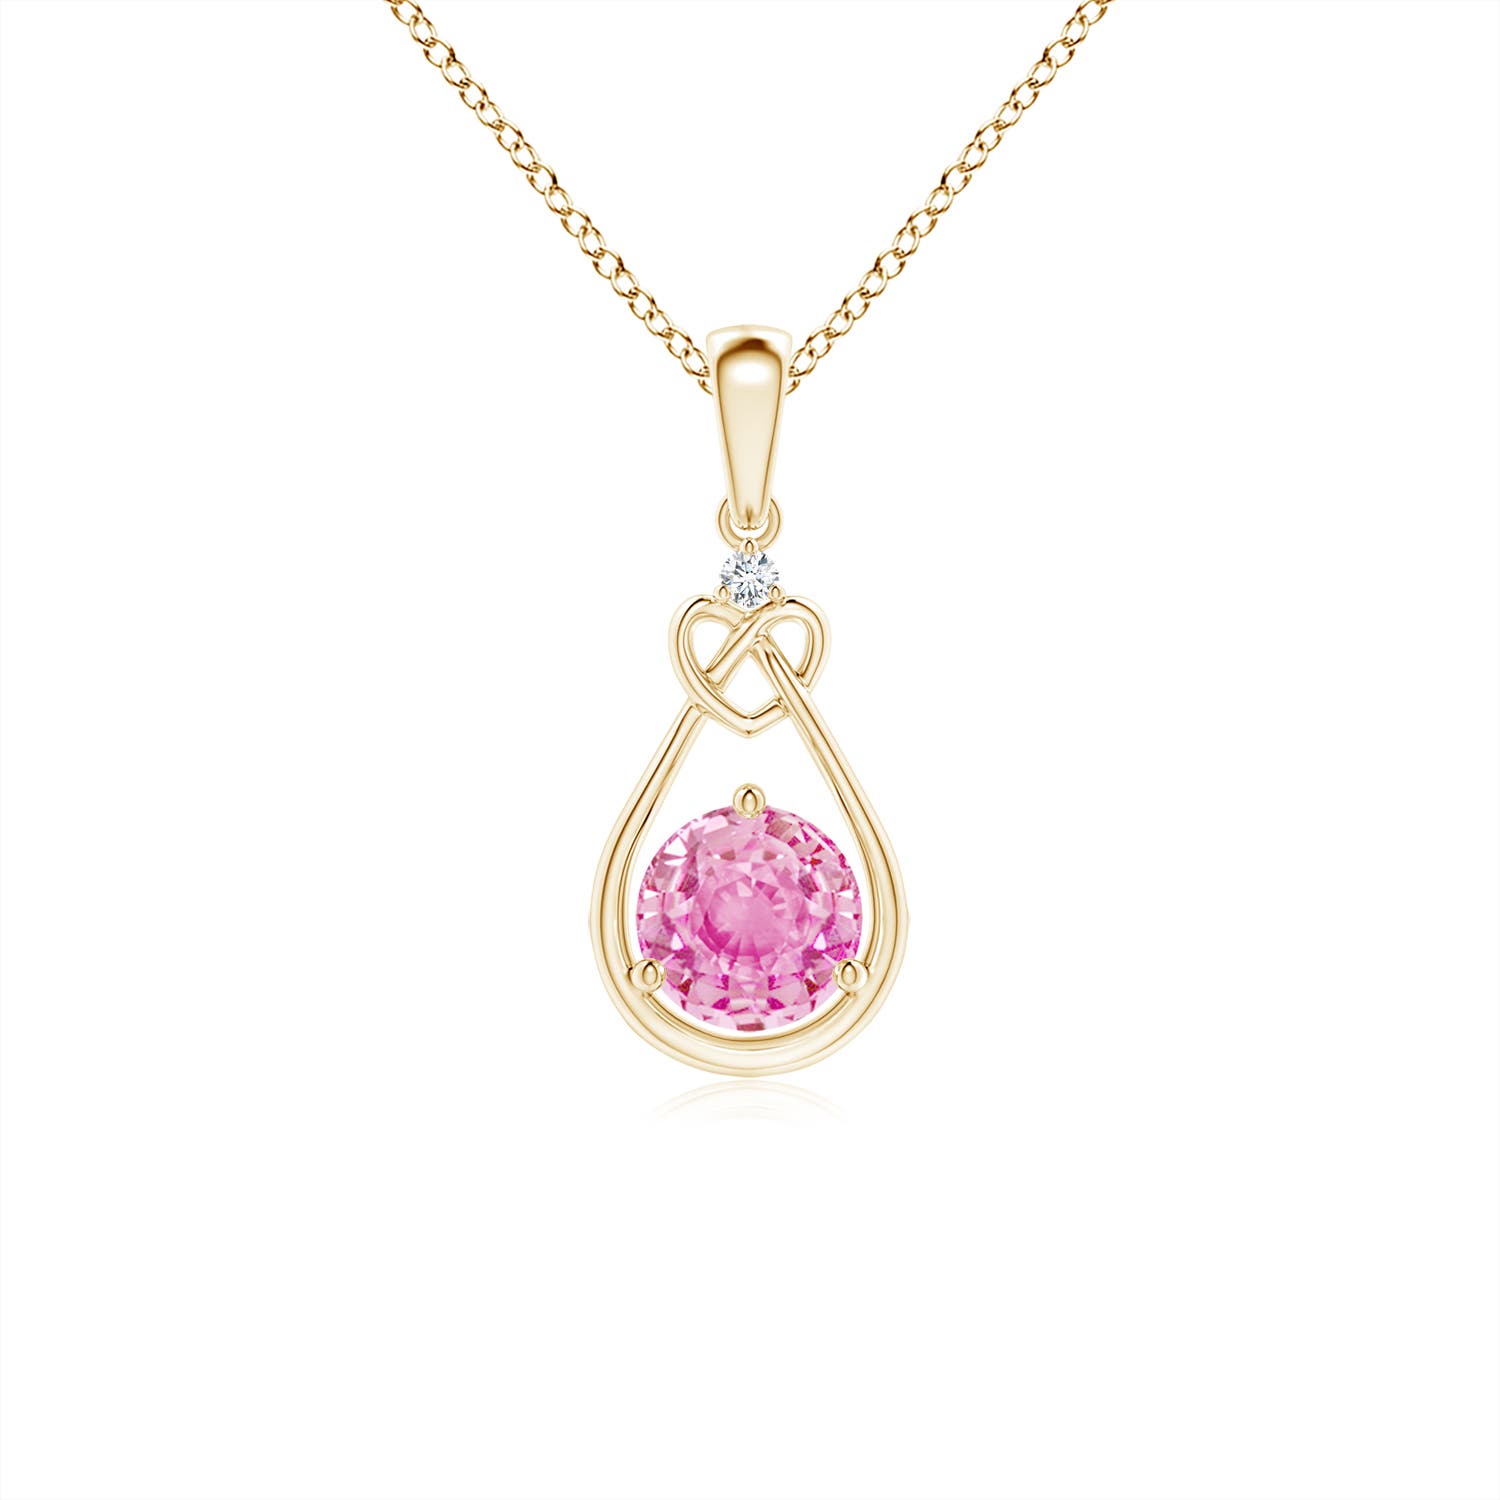 A - Pink Sapphire / 0.61 CT / 14 KT Yellow Gold